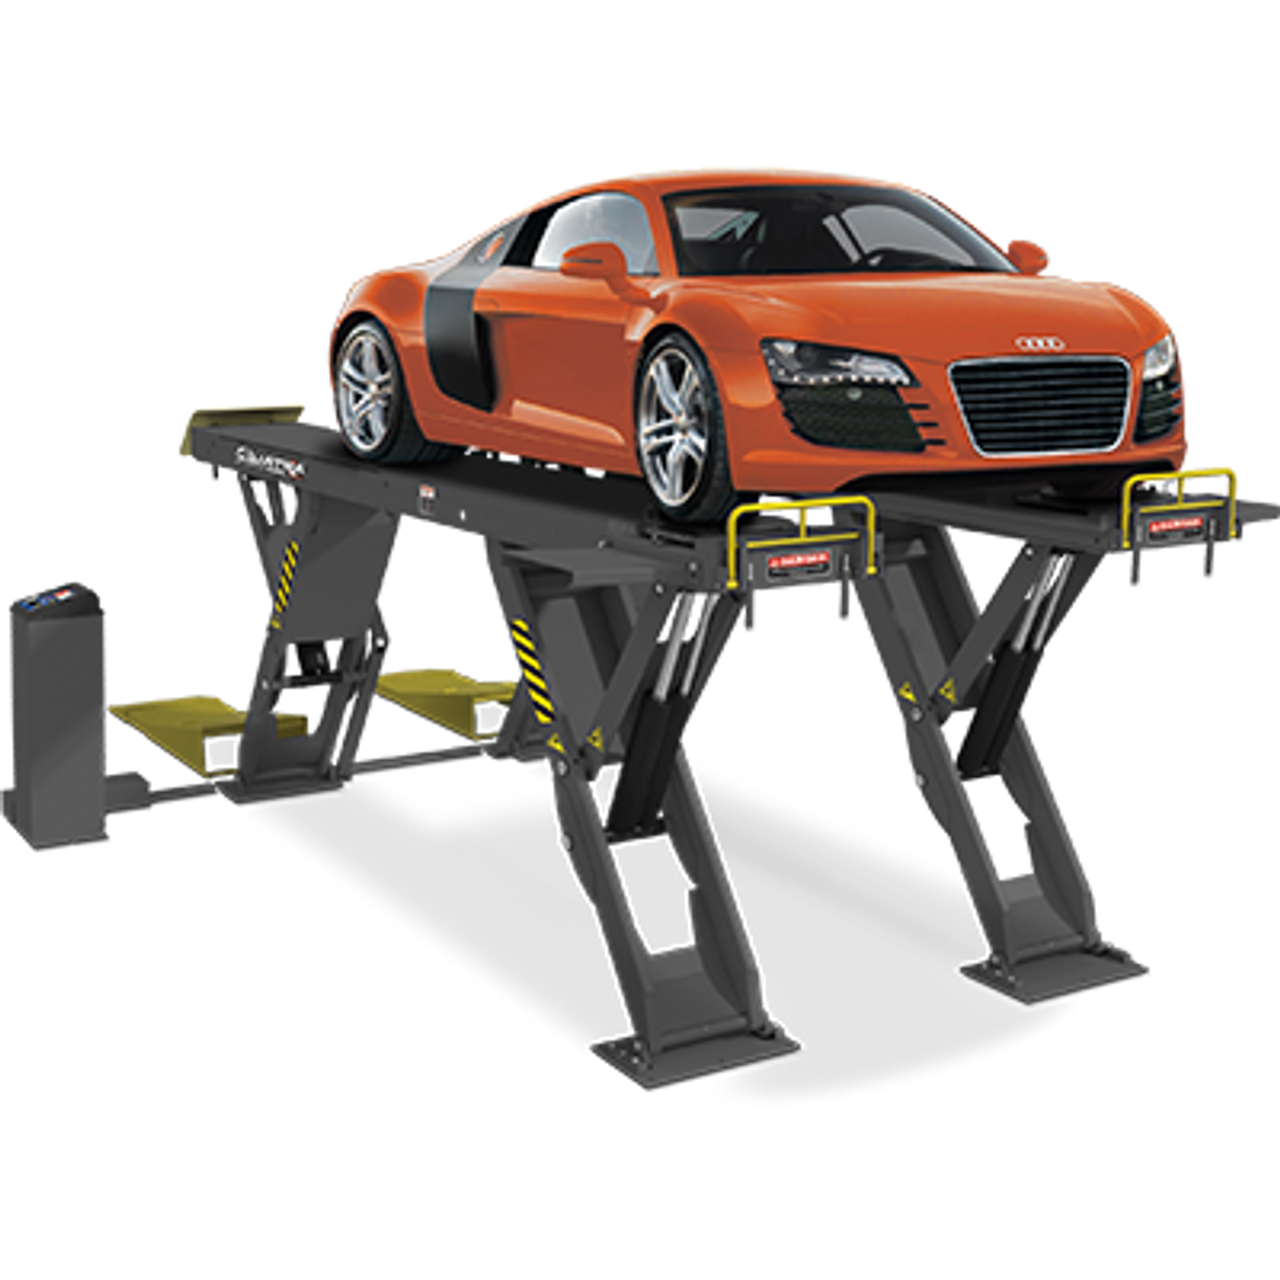 BendPak - Car Lifts, Wheel Service, Shop Equipment and more!